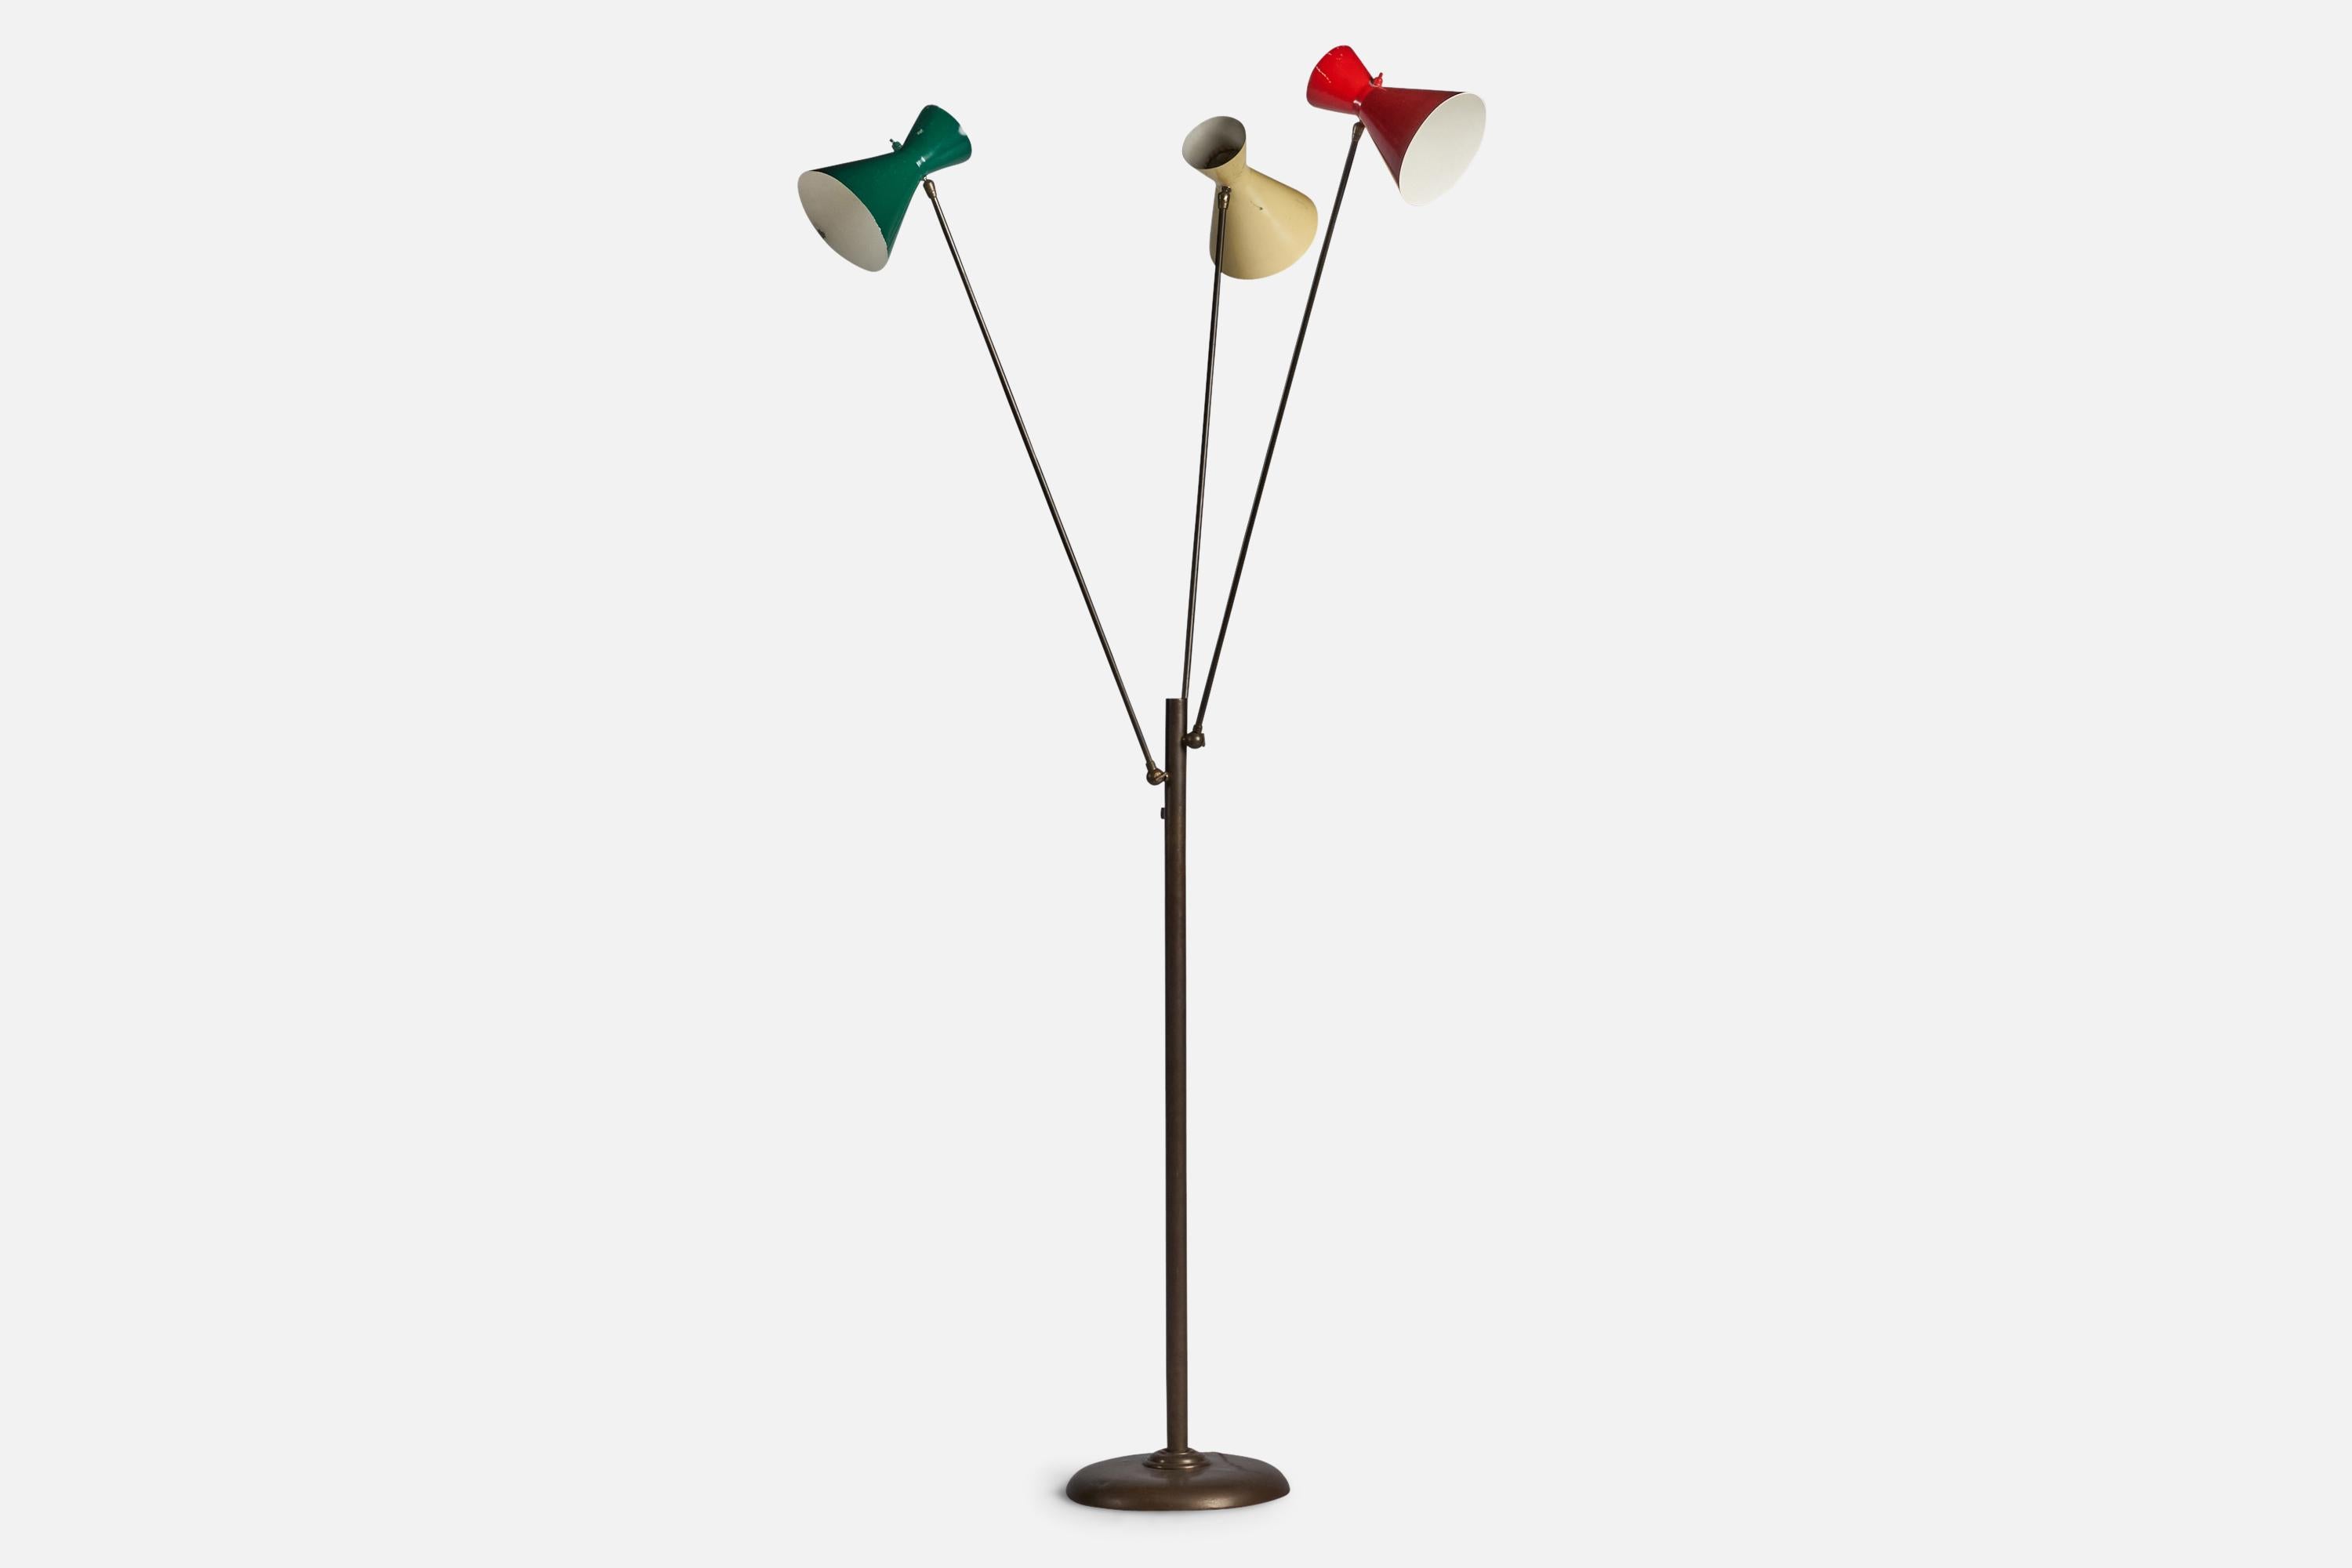 An adjustable brass and green yellow and red-lacquered metal floor lamp designed and produced in Italy, c. 1980s.

Overall Dimensions (inches): 73.75” H x 31.5” Diameter
Bulb Specifications: E-26 Bulb
Number of Sockets: 3
All lighting will be